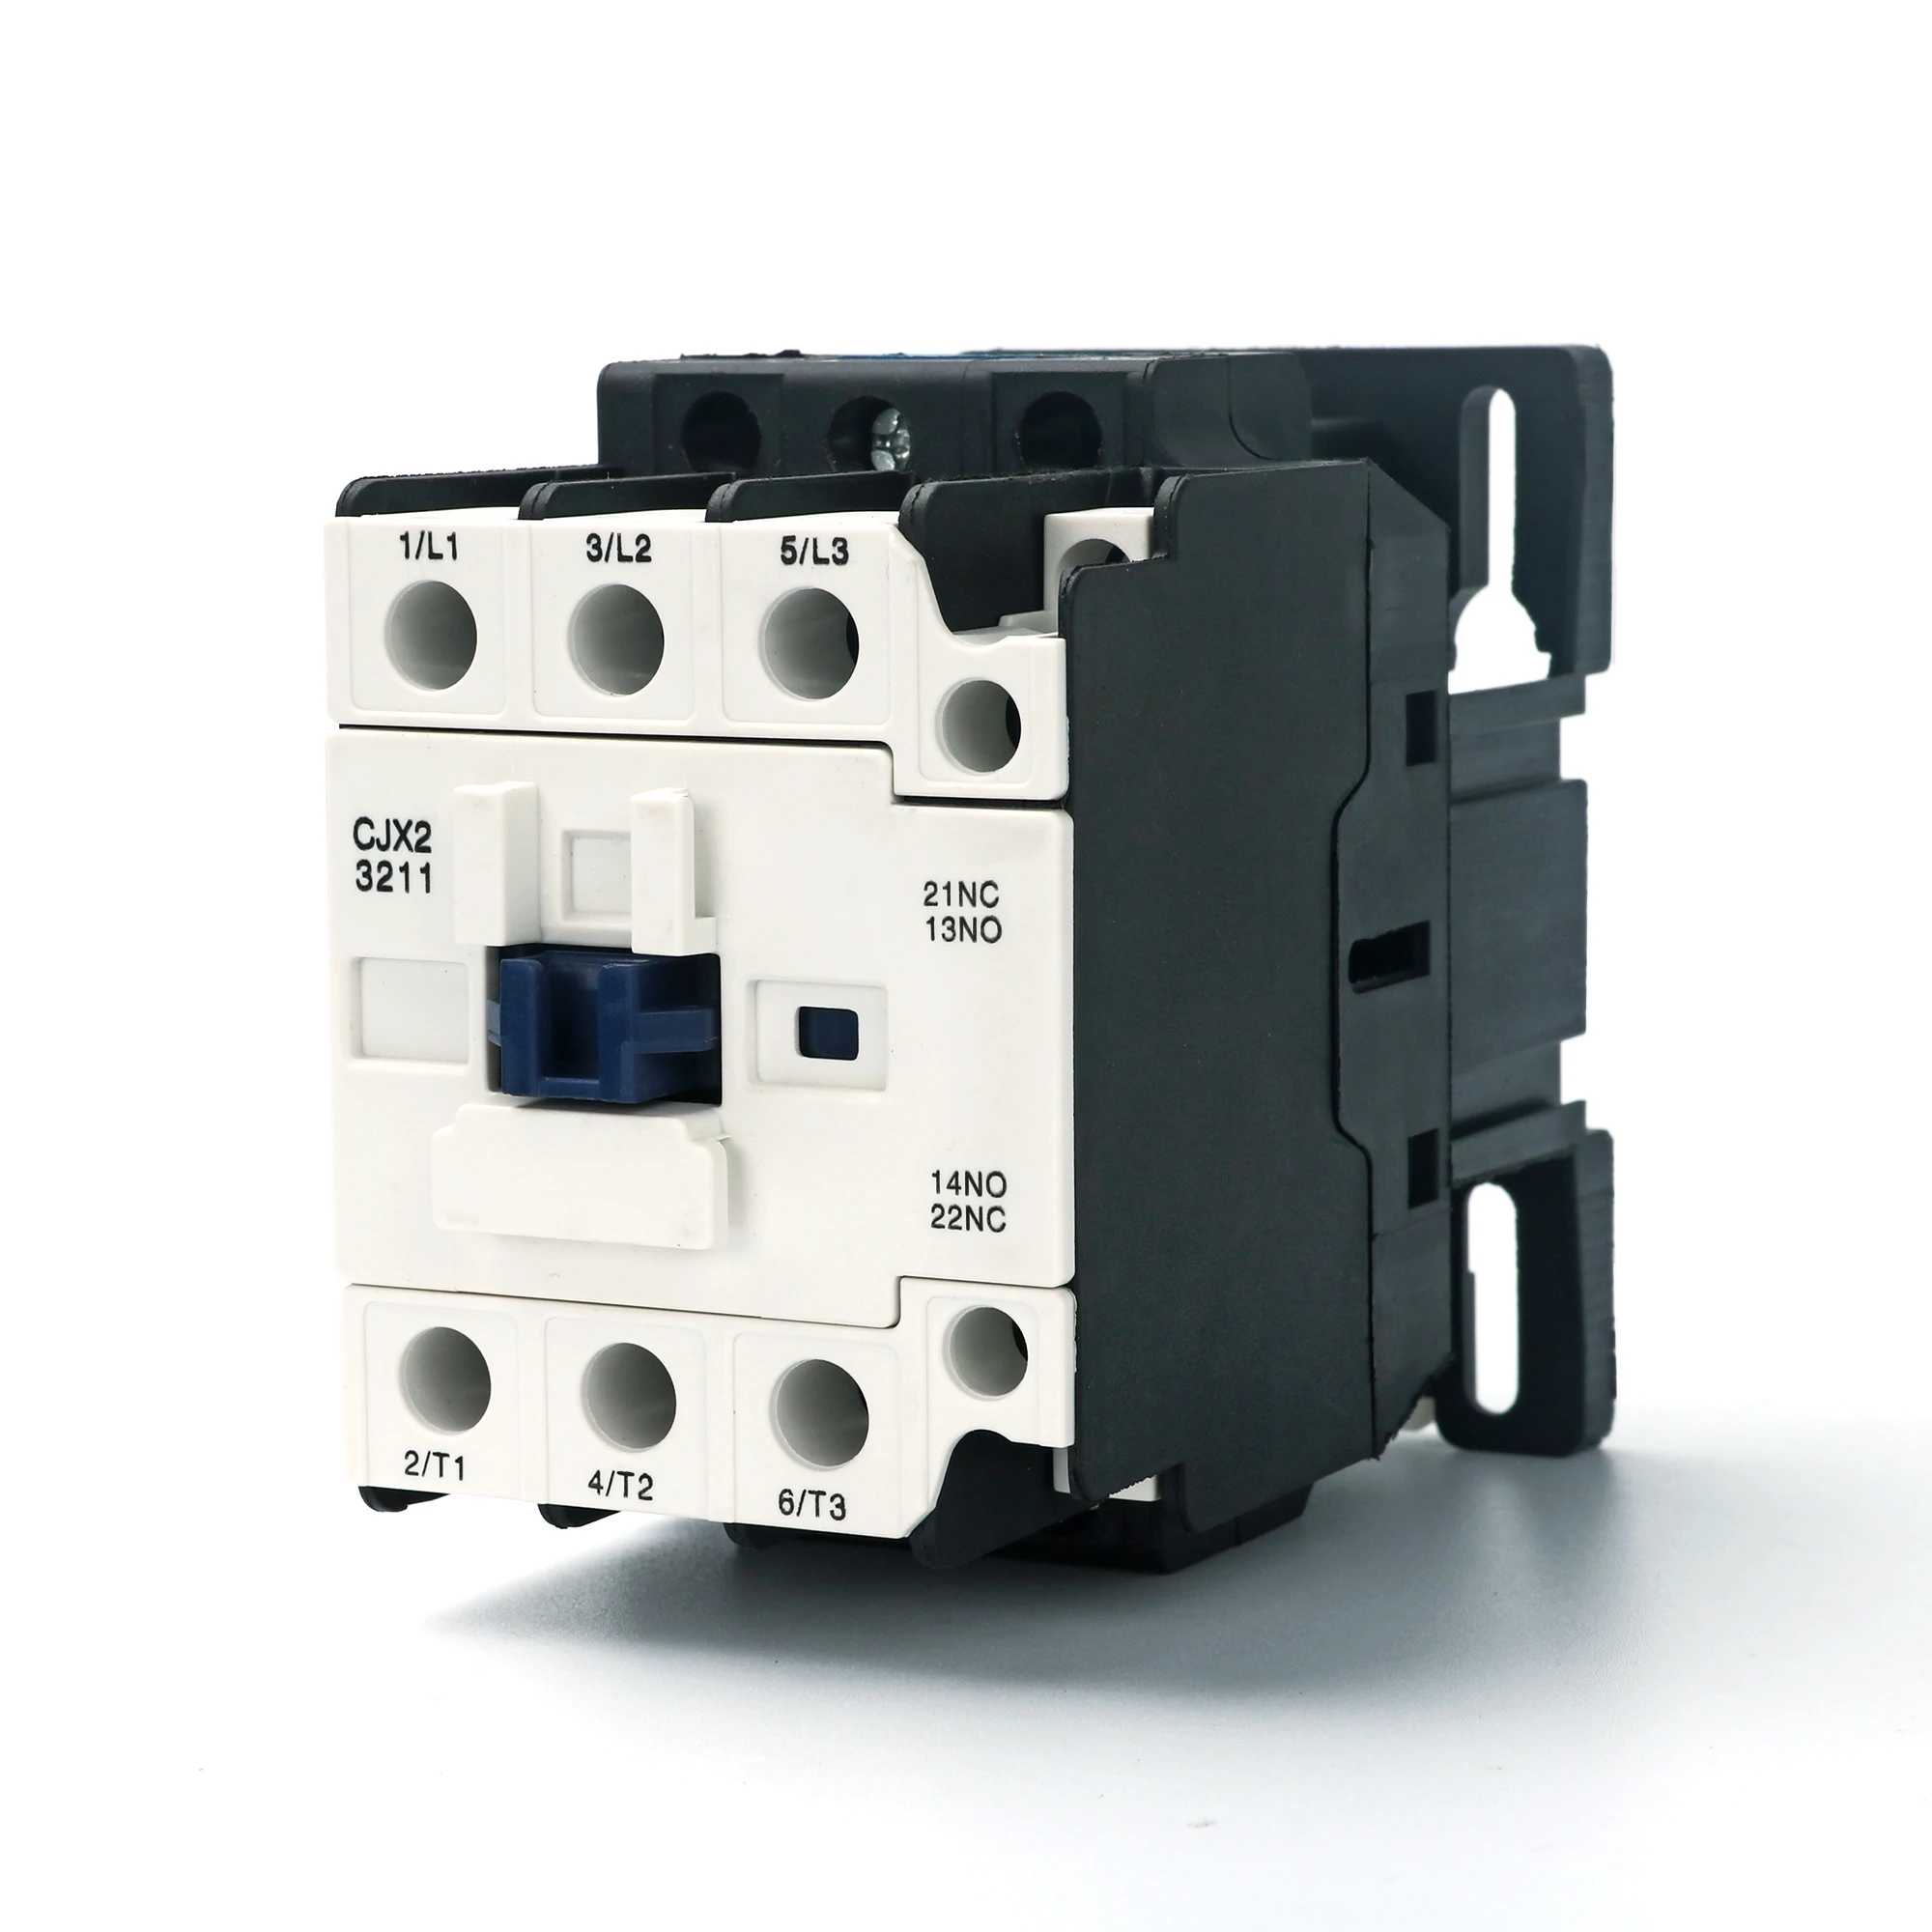 

Contactor CJX2-3211 32A switches AC Contactor Voltage 220VDin Rail Mounted 3P+1NC+1NO Normally Colse, Normally Open